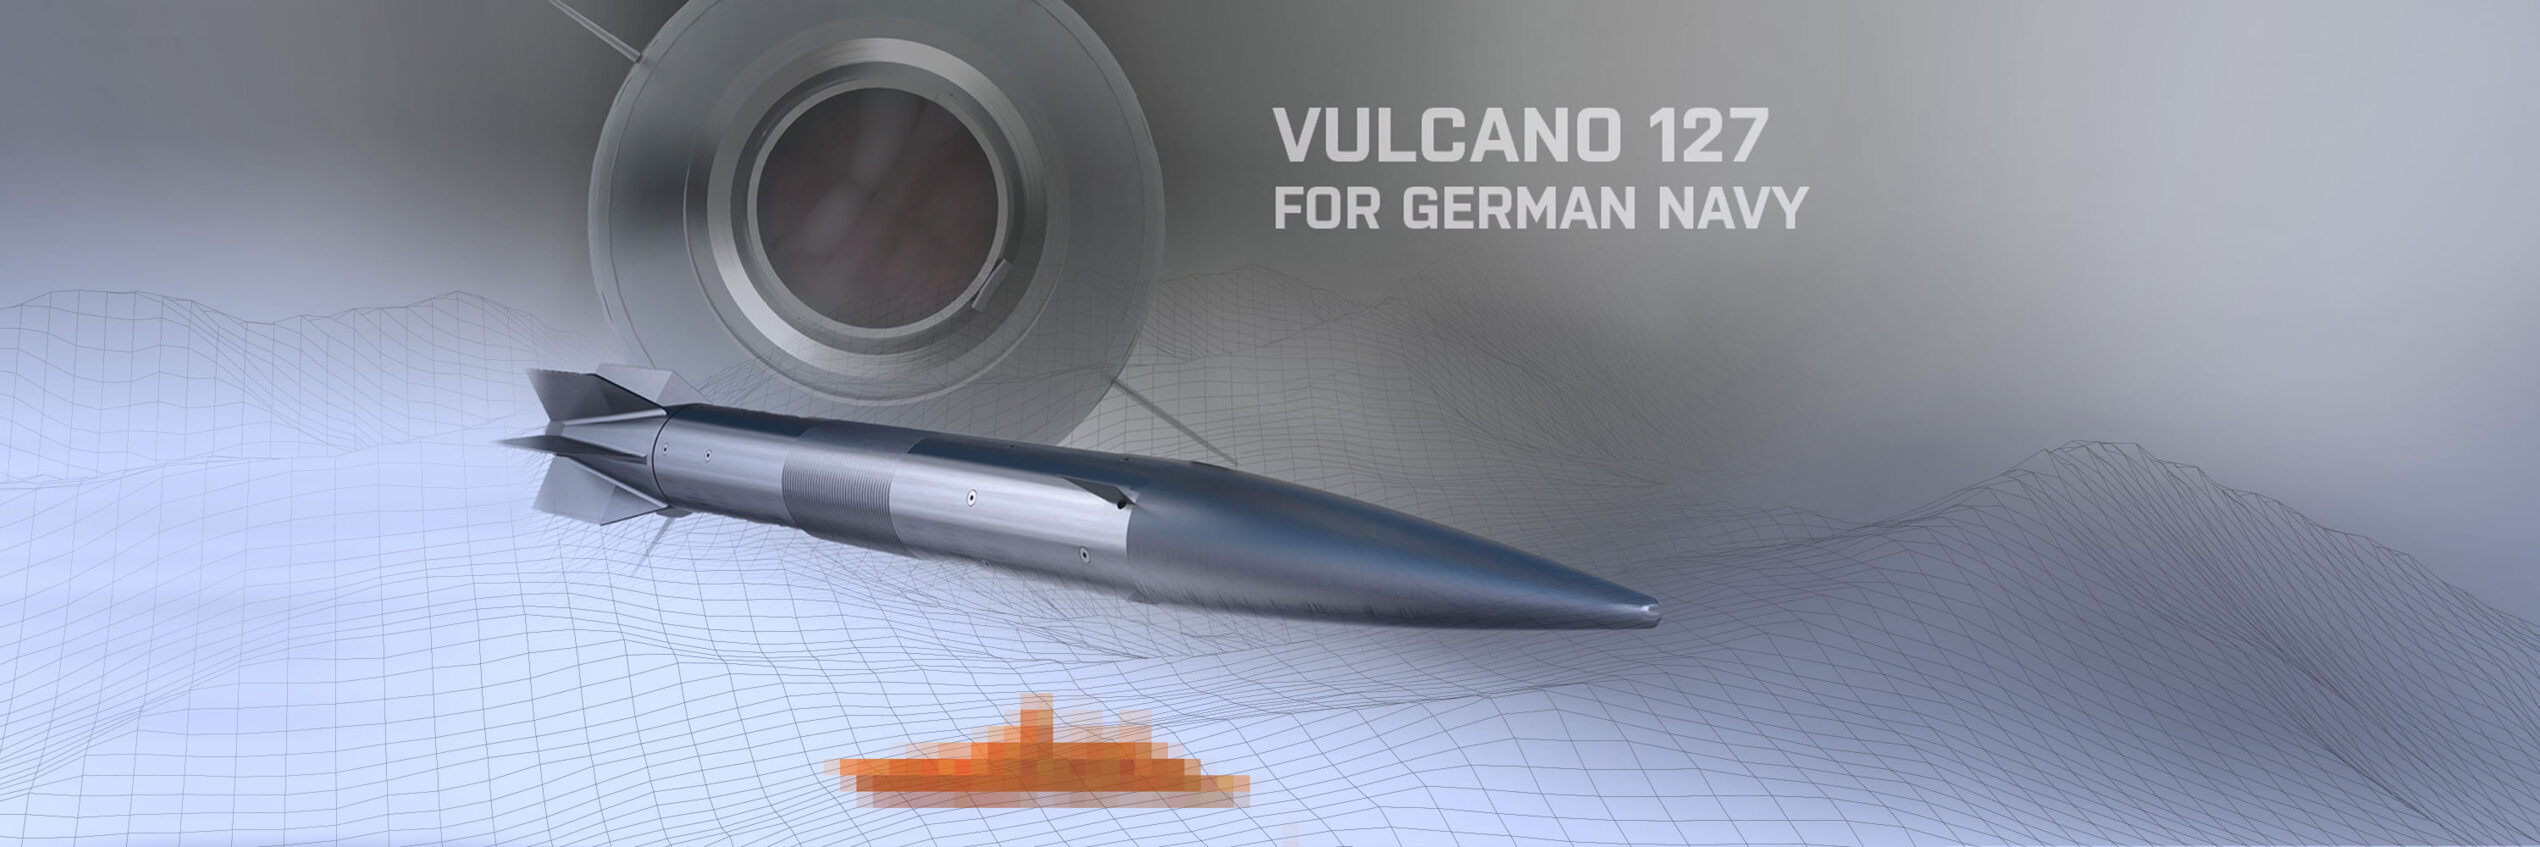 Vulcano 127 guided ammunition from Diehl Defence and Leonardo for German Navy